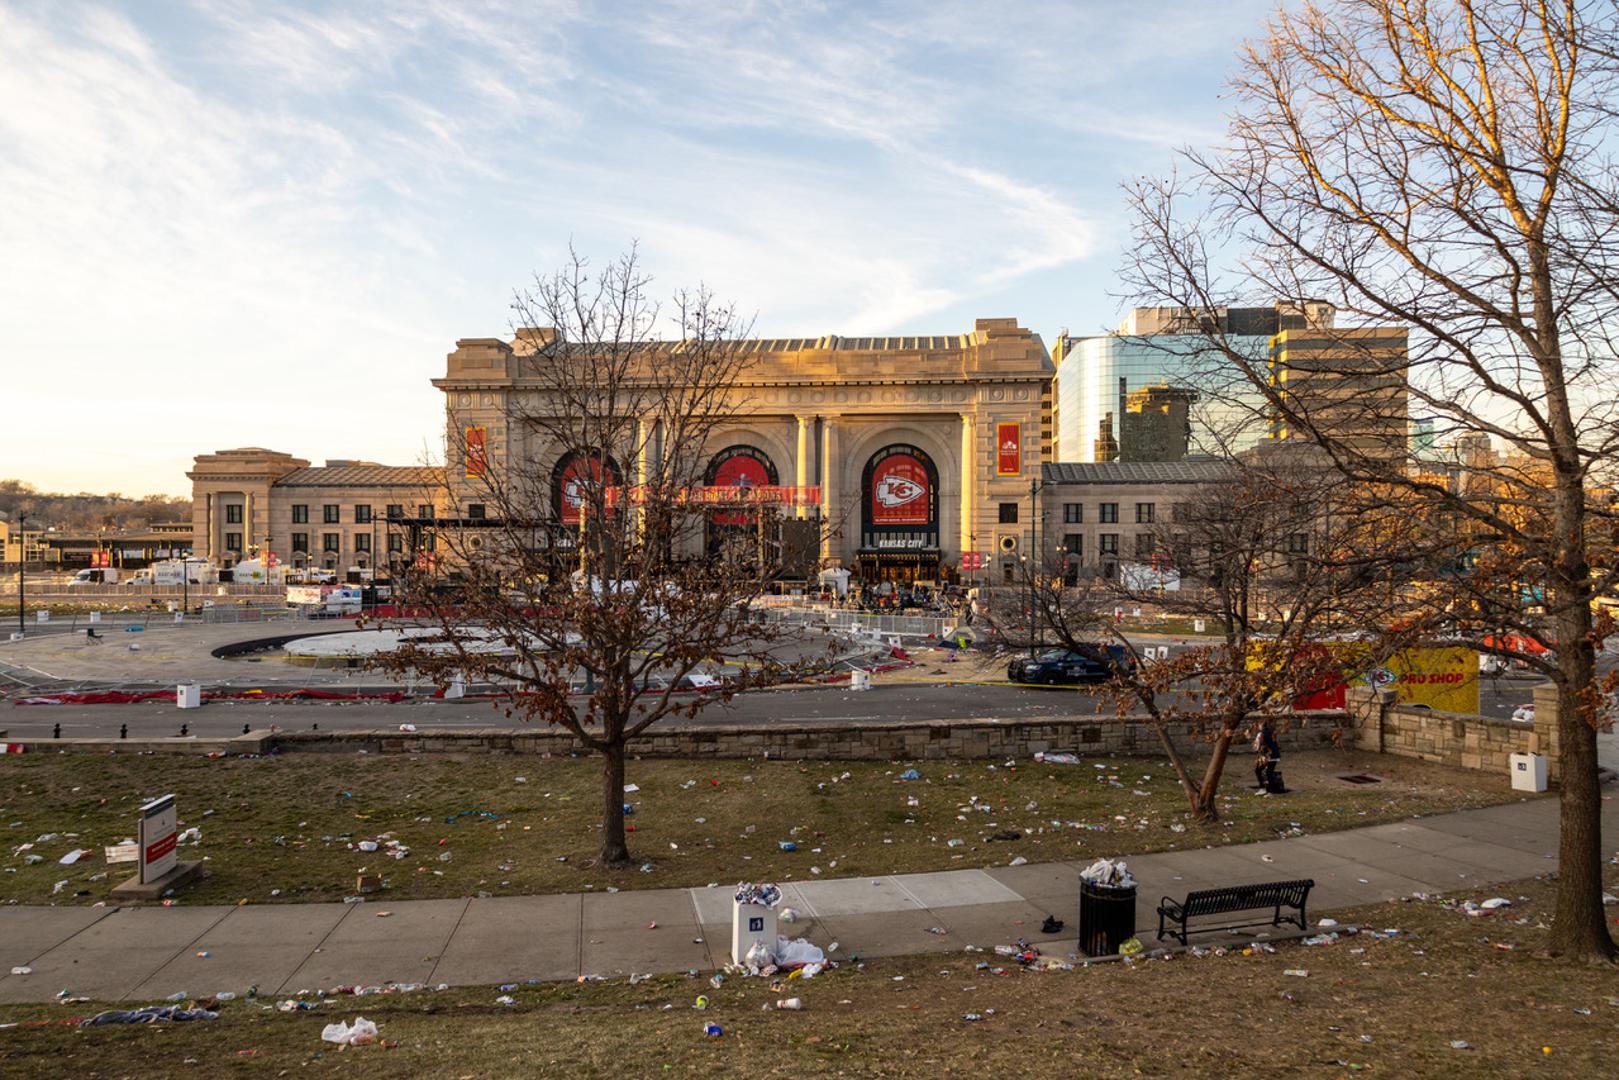 (240215) -- KANSAS CITY, Feb. 15, 2024 (Xinhua) -- This photo taken on Feb. 14, 2024 shows the site following a shooting in Kansas City, Missouri, the United States. At least one person was killed and 22 were injured as gunfire erupted during the Kansas City Chiefs' Super Bowl victory parade in Kansas City, U.S. state of Missouri, Stacey Graves, chief of the Kansas City Missouri Police Department, said at a news conference on Wednesday afternoon. (Photo by Robert Reed/Xinhua) Photo: Robert Reed/XINHUA